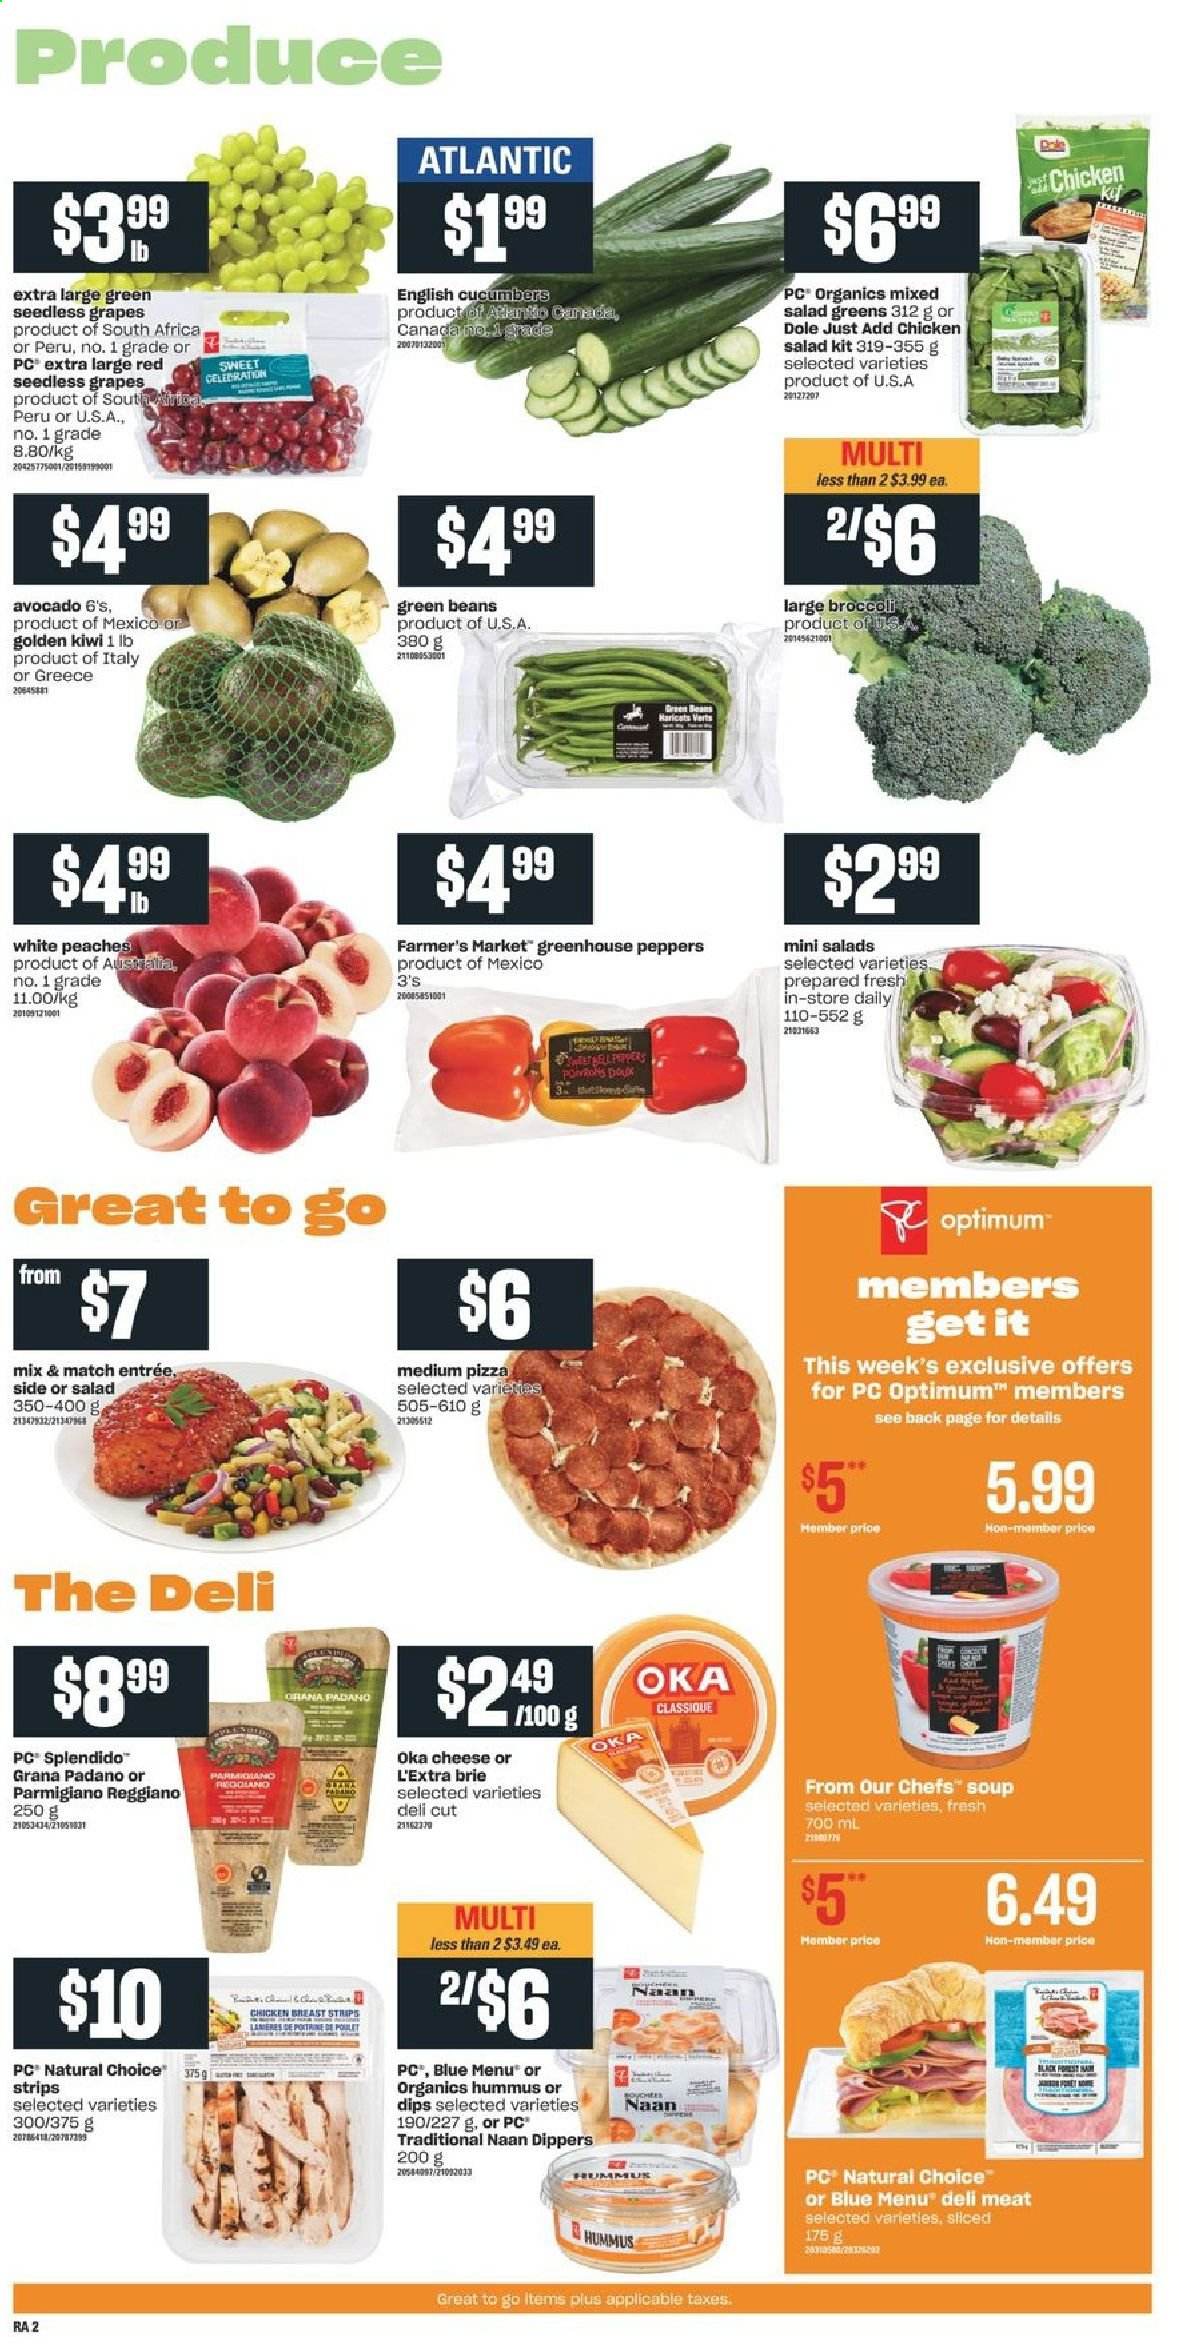 Atlantic Superstore flyer  - January 28, 2021 - February 03, 2021. Page 3.